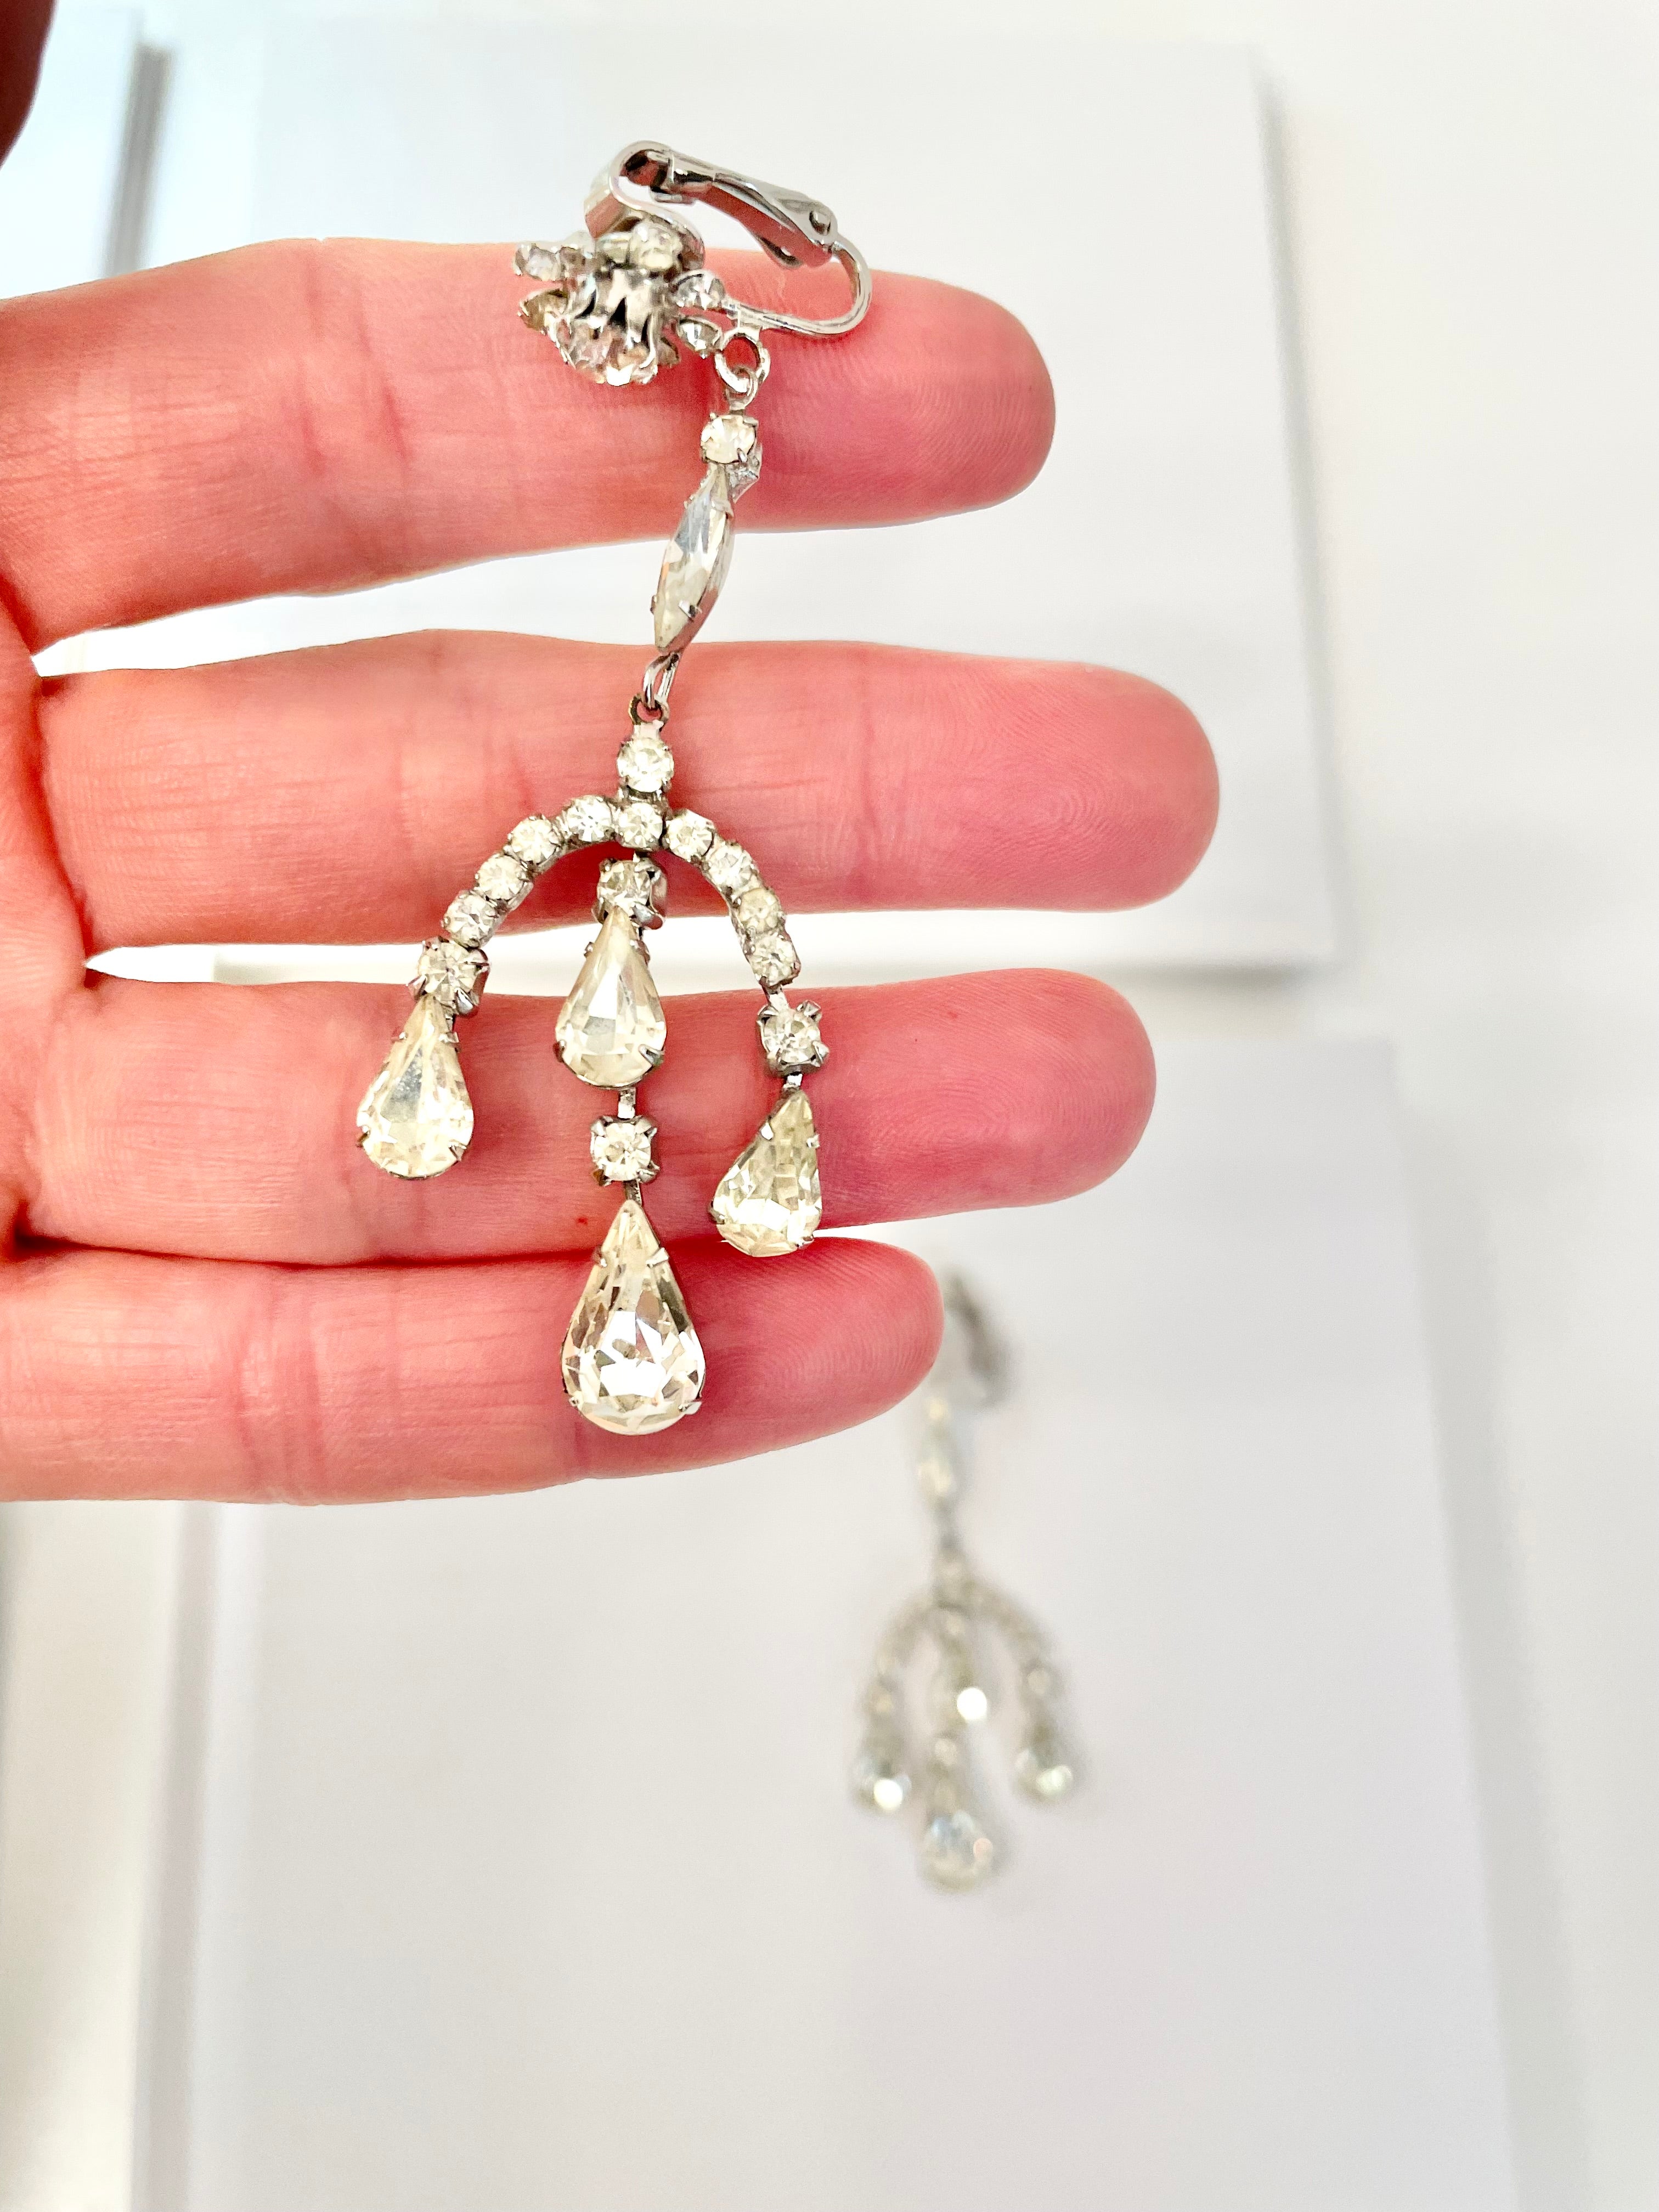 1960's Heiress and her love of the sparkly! These are a true mid century gem. Shimmering like diamonds.